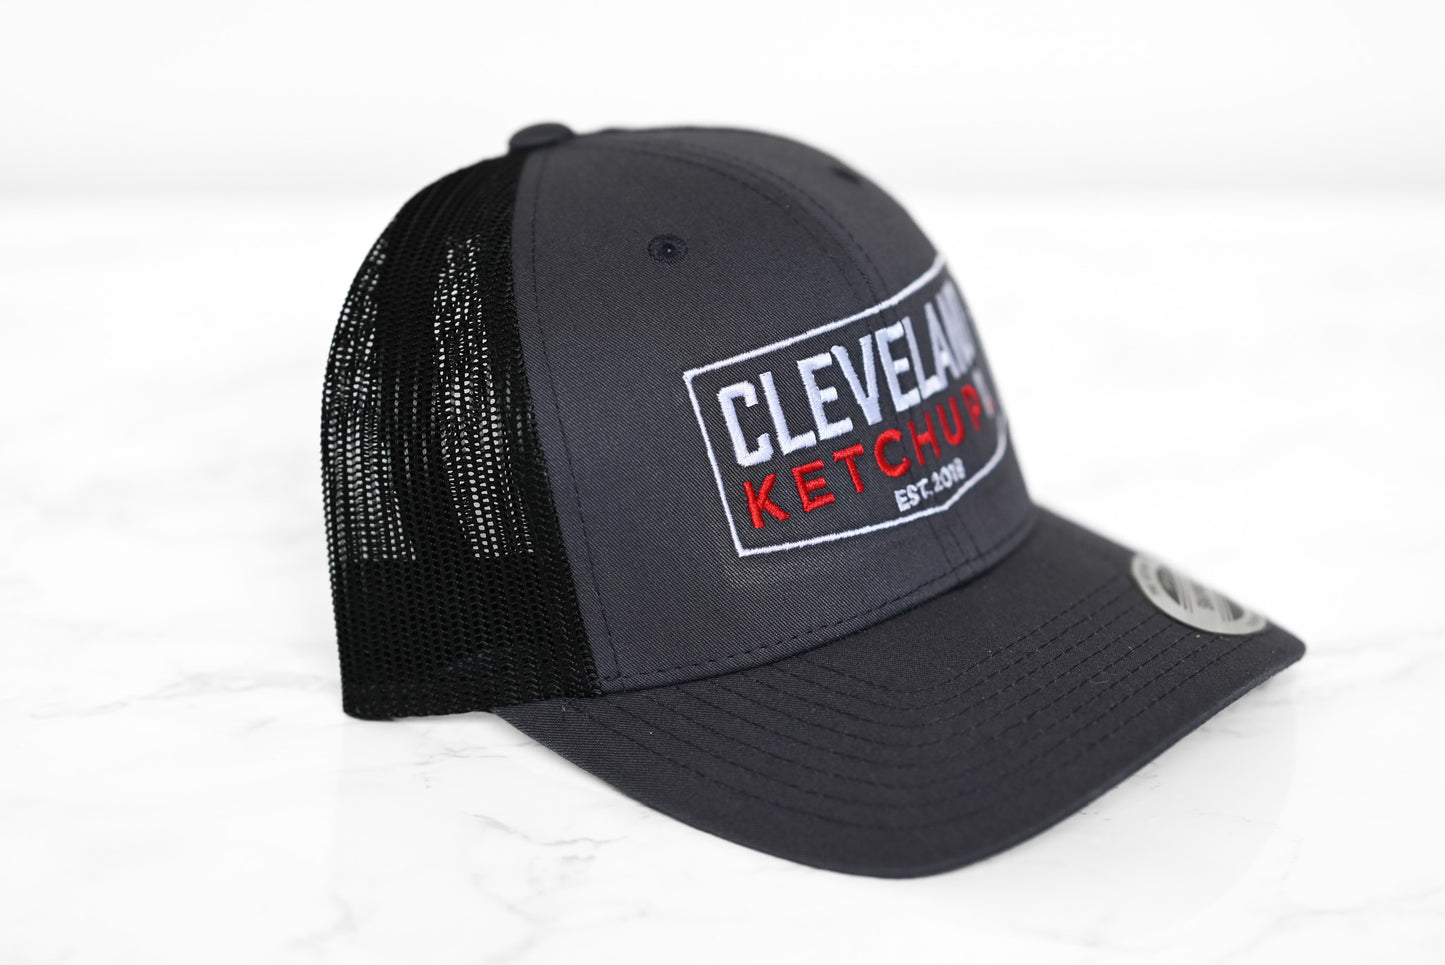 Cleveland Ketchup Co. Trucker Hat